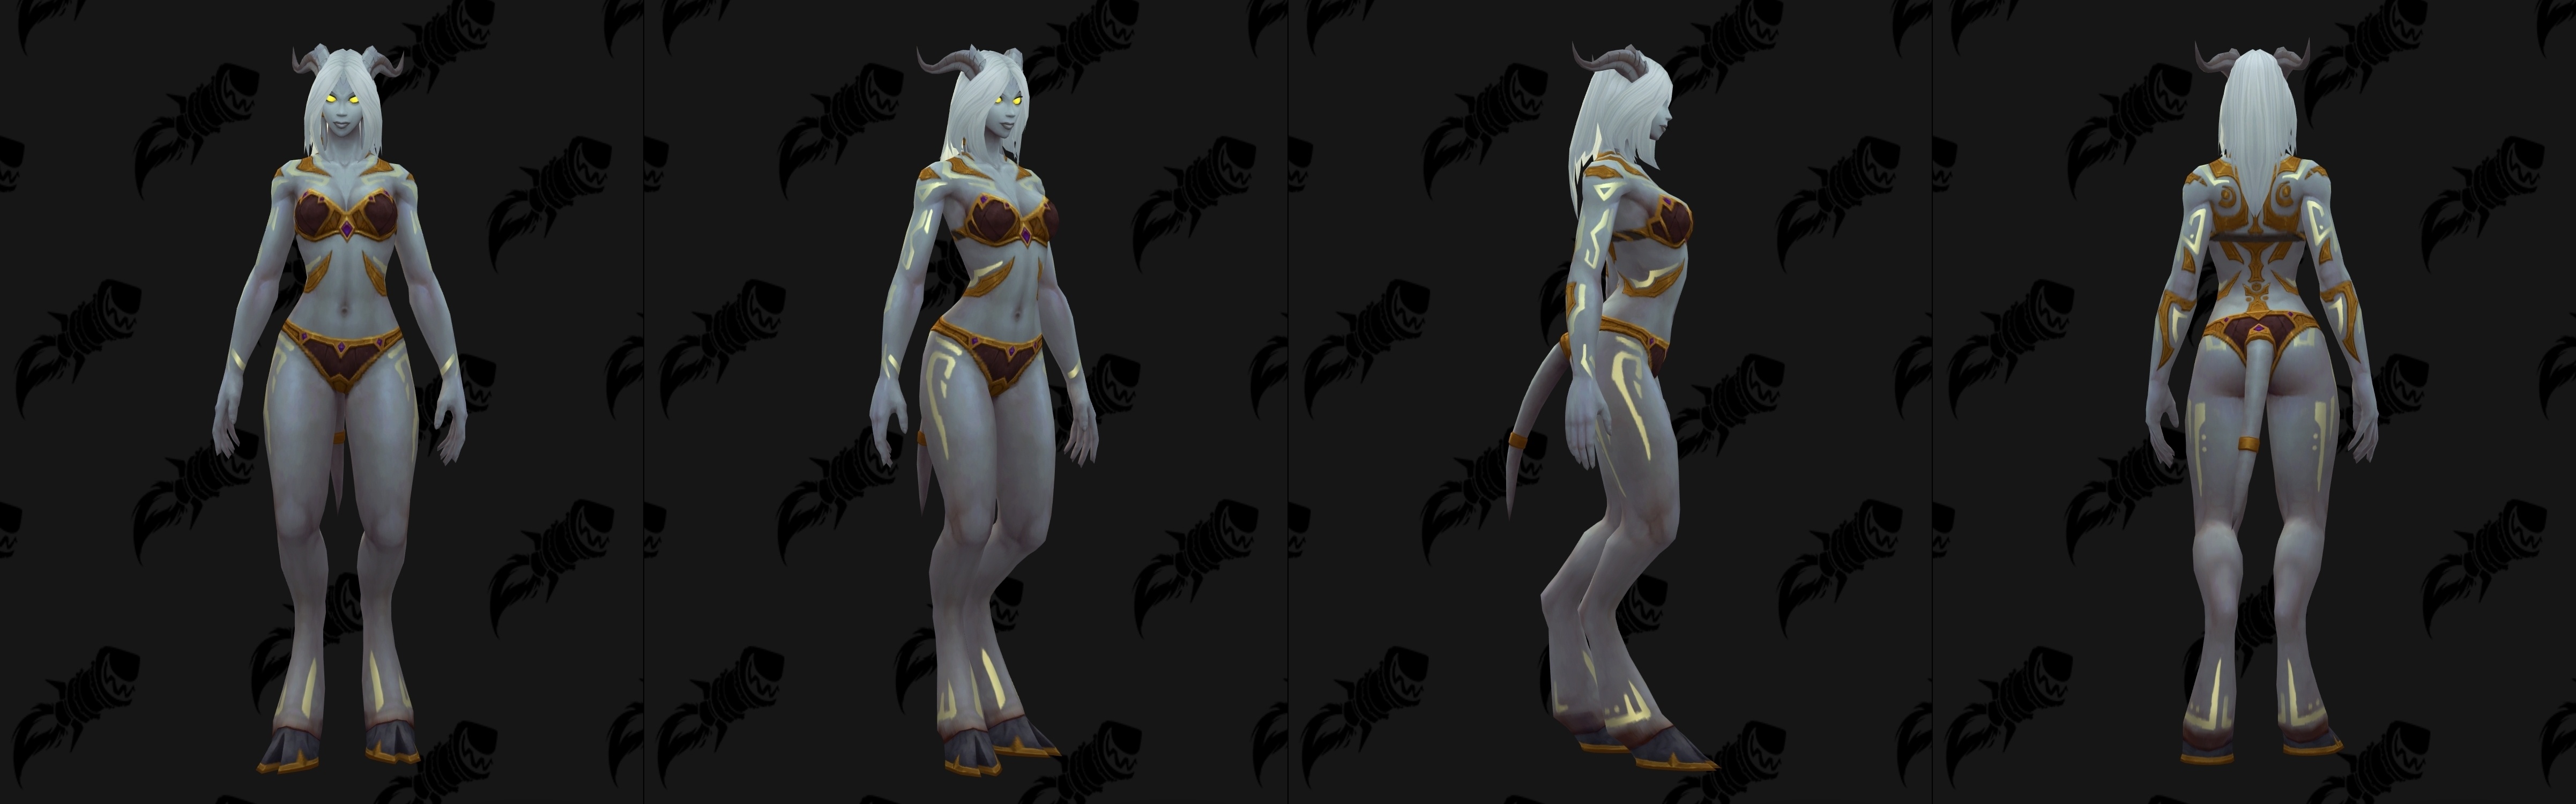 Lightforged Draenei Allied Race Guides Wowhead from wow.zamimg.com. 